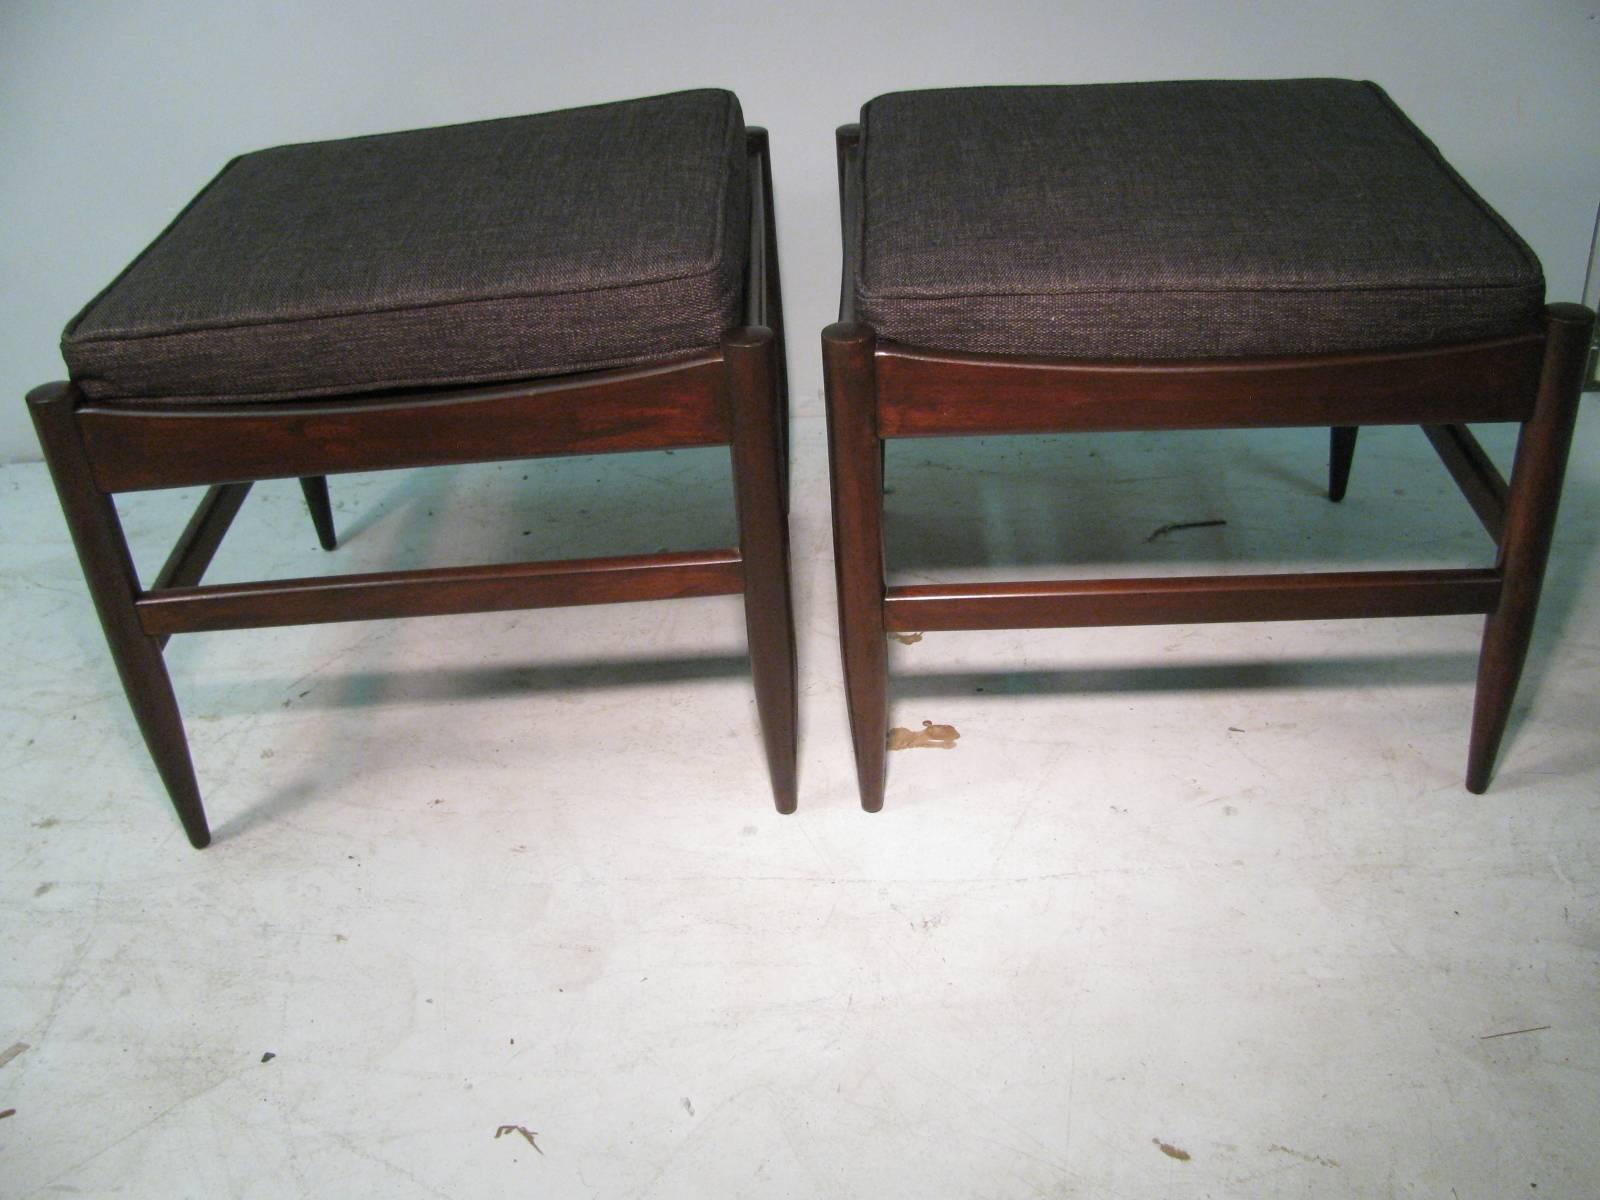 Simple and elegant Pair of ottomans with removable cushions which are newly refinished and reupholstered. Sculpted wood with turned legs.